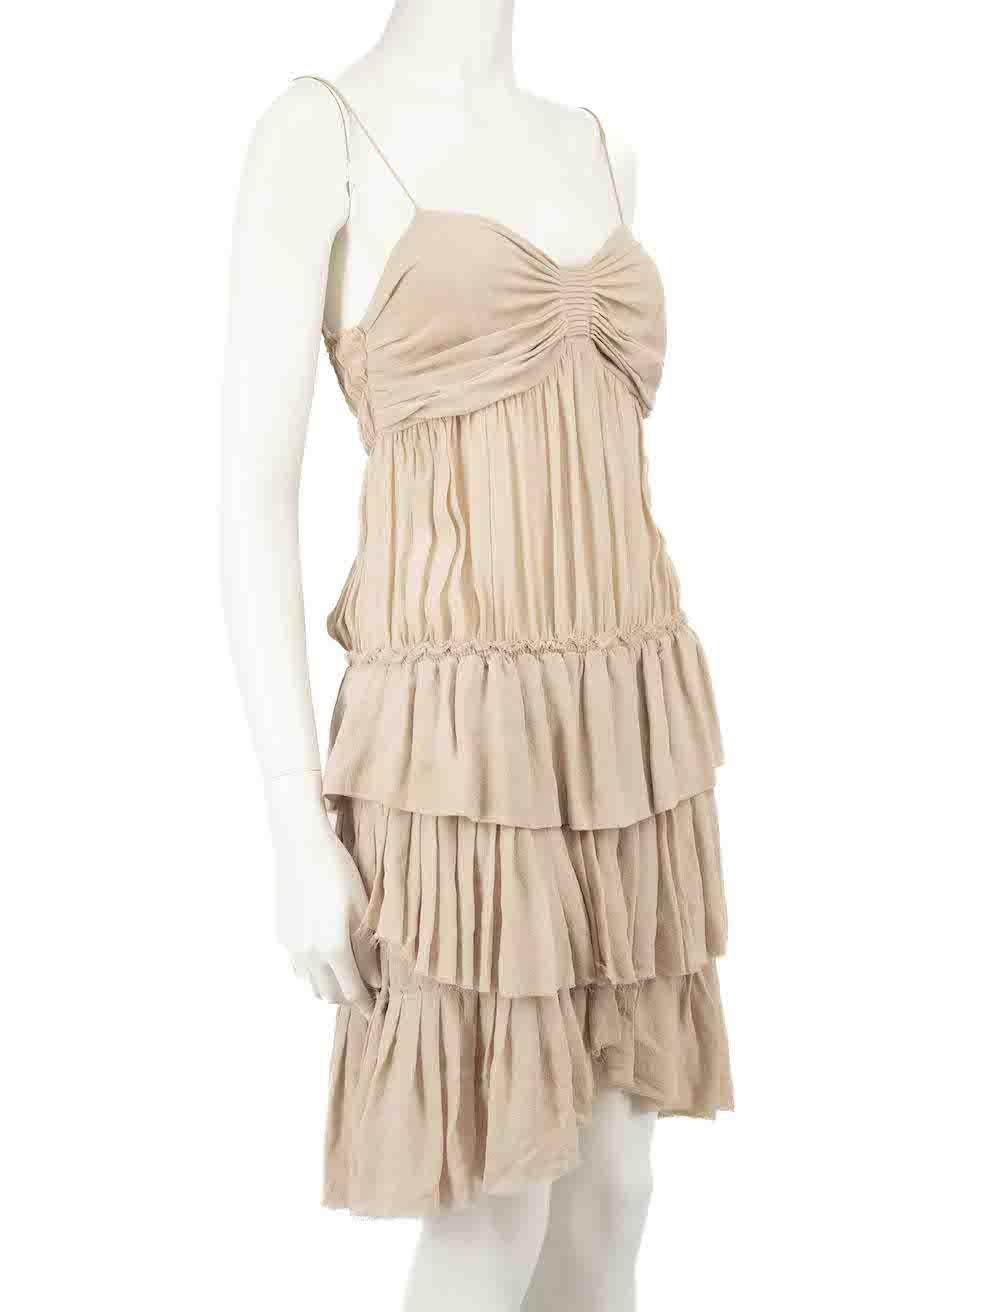 CONDITION is Never worn. No visible wear to dress is evident on this new Isabel Marant designer resale item.
 
 
 
 Details
 
 
 Beige
 
 Silk
 
 Mini dress
 
 Sweetheart neckline
 
 Slightly sheer on waist
 
 Smock elasticated detail on back
 
